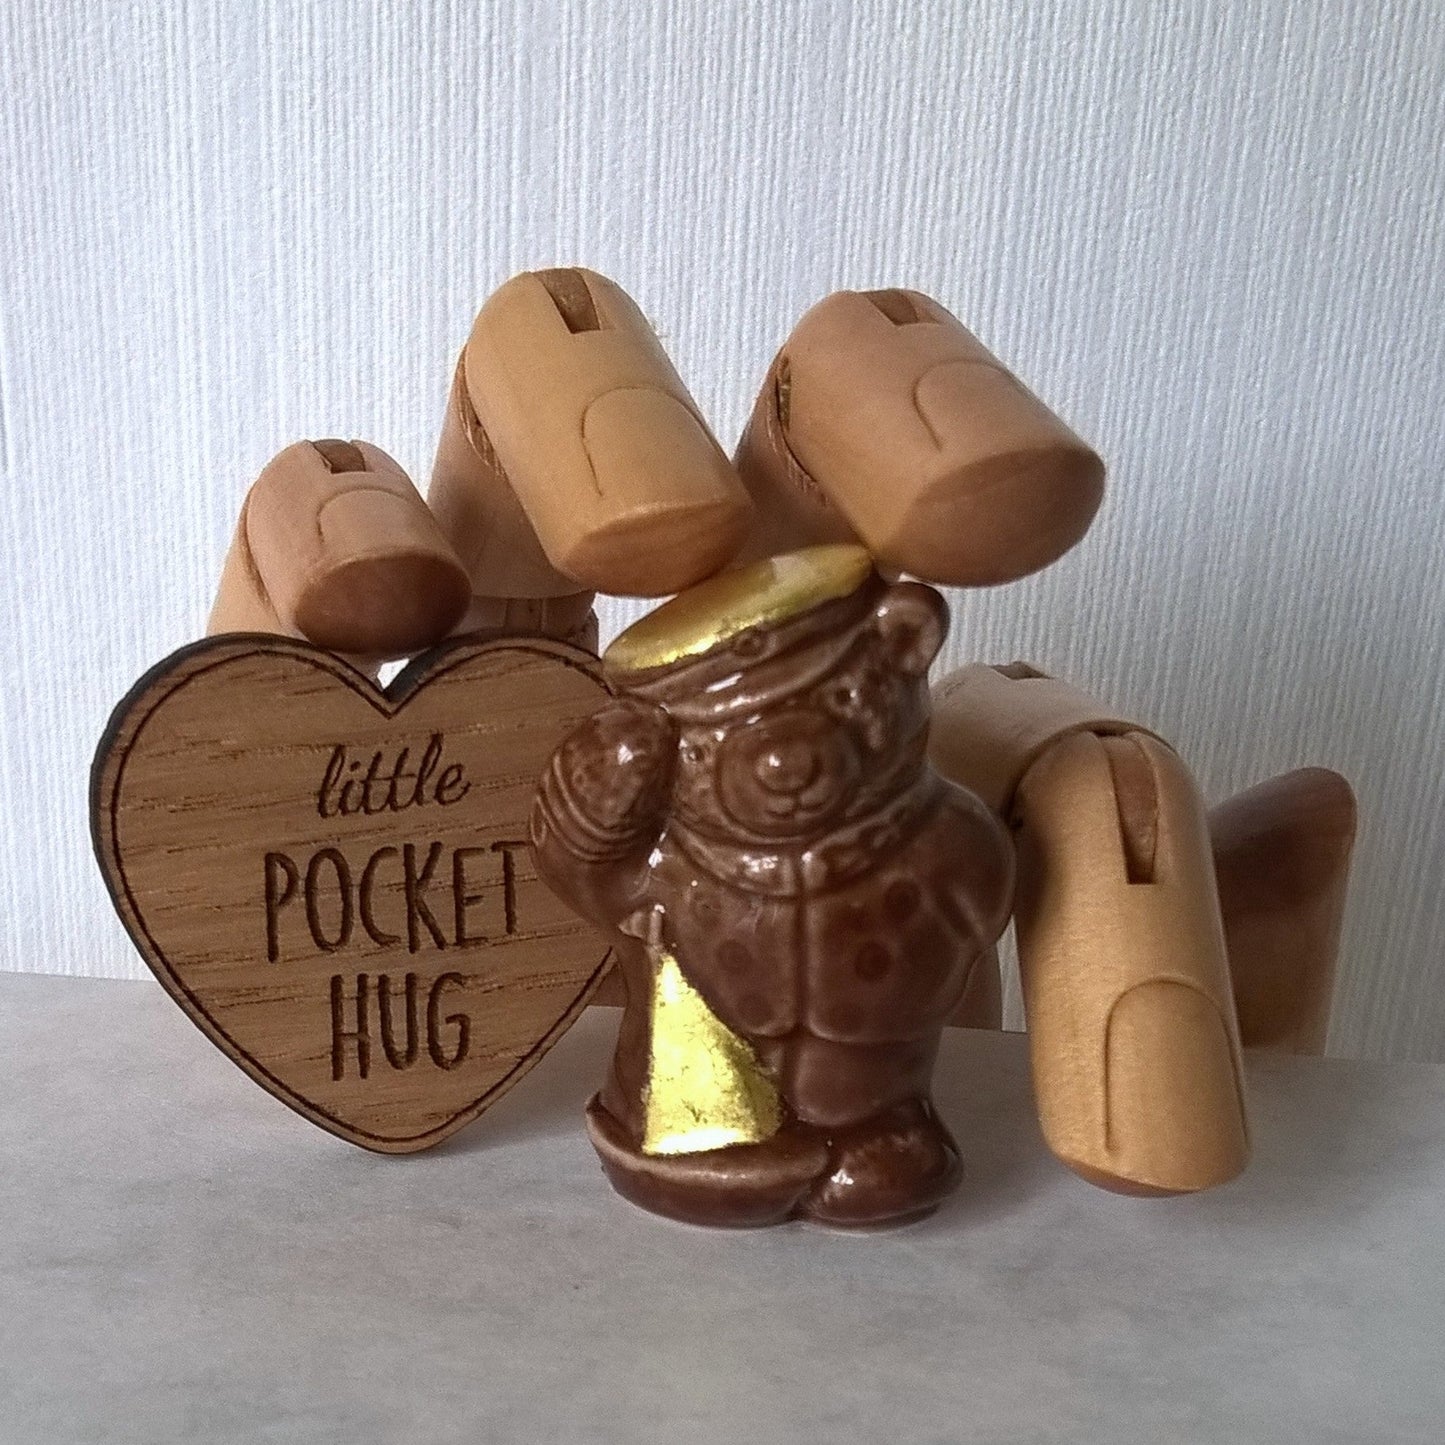 Little brown ceramic sailor bear with wooden heart pocket hug . Pure gold leaf has been added to the bears cap and sail of boat